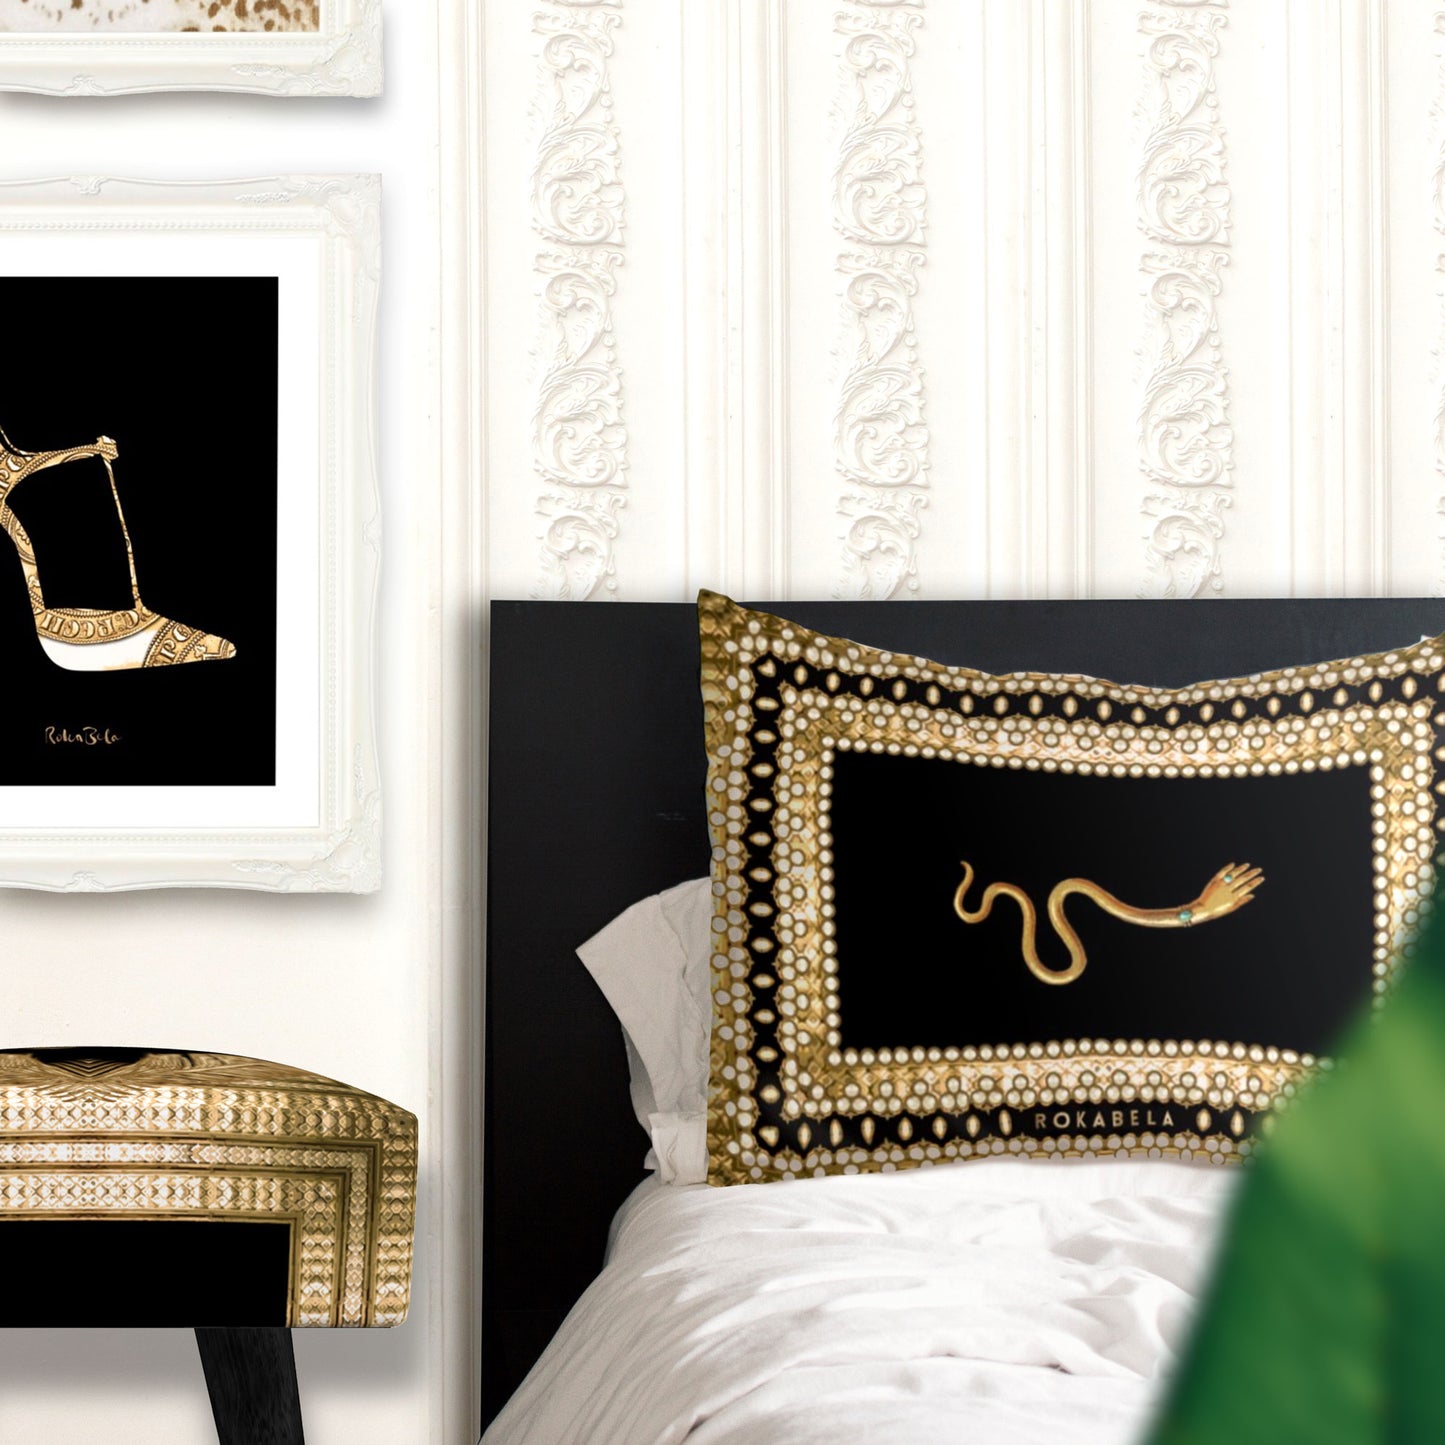 Silk pillowcase in black and gold with exclusive designer exotic print with bejewelled effect and serpent.